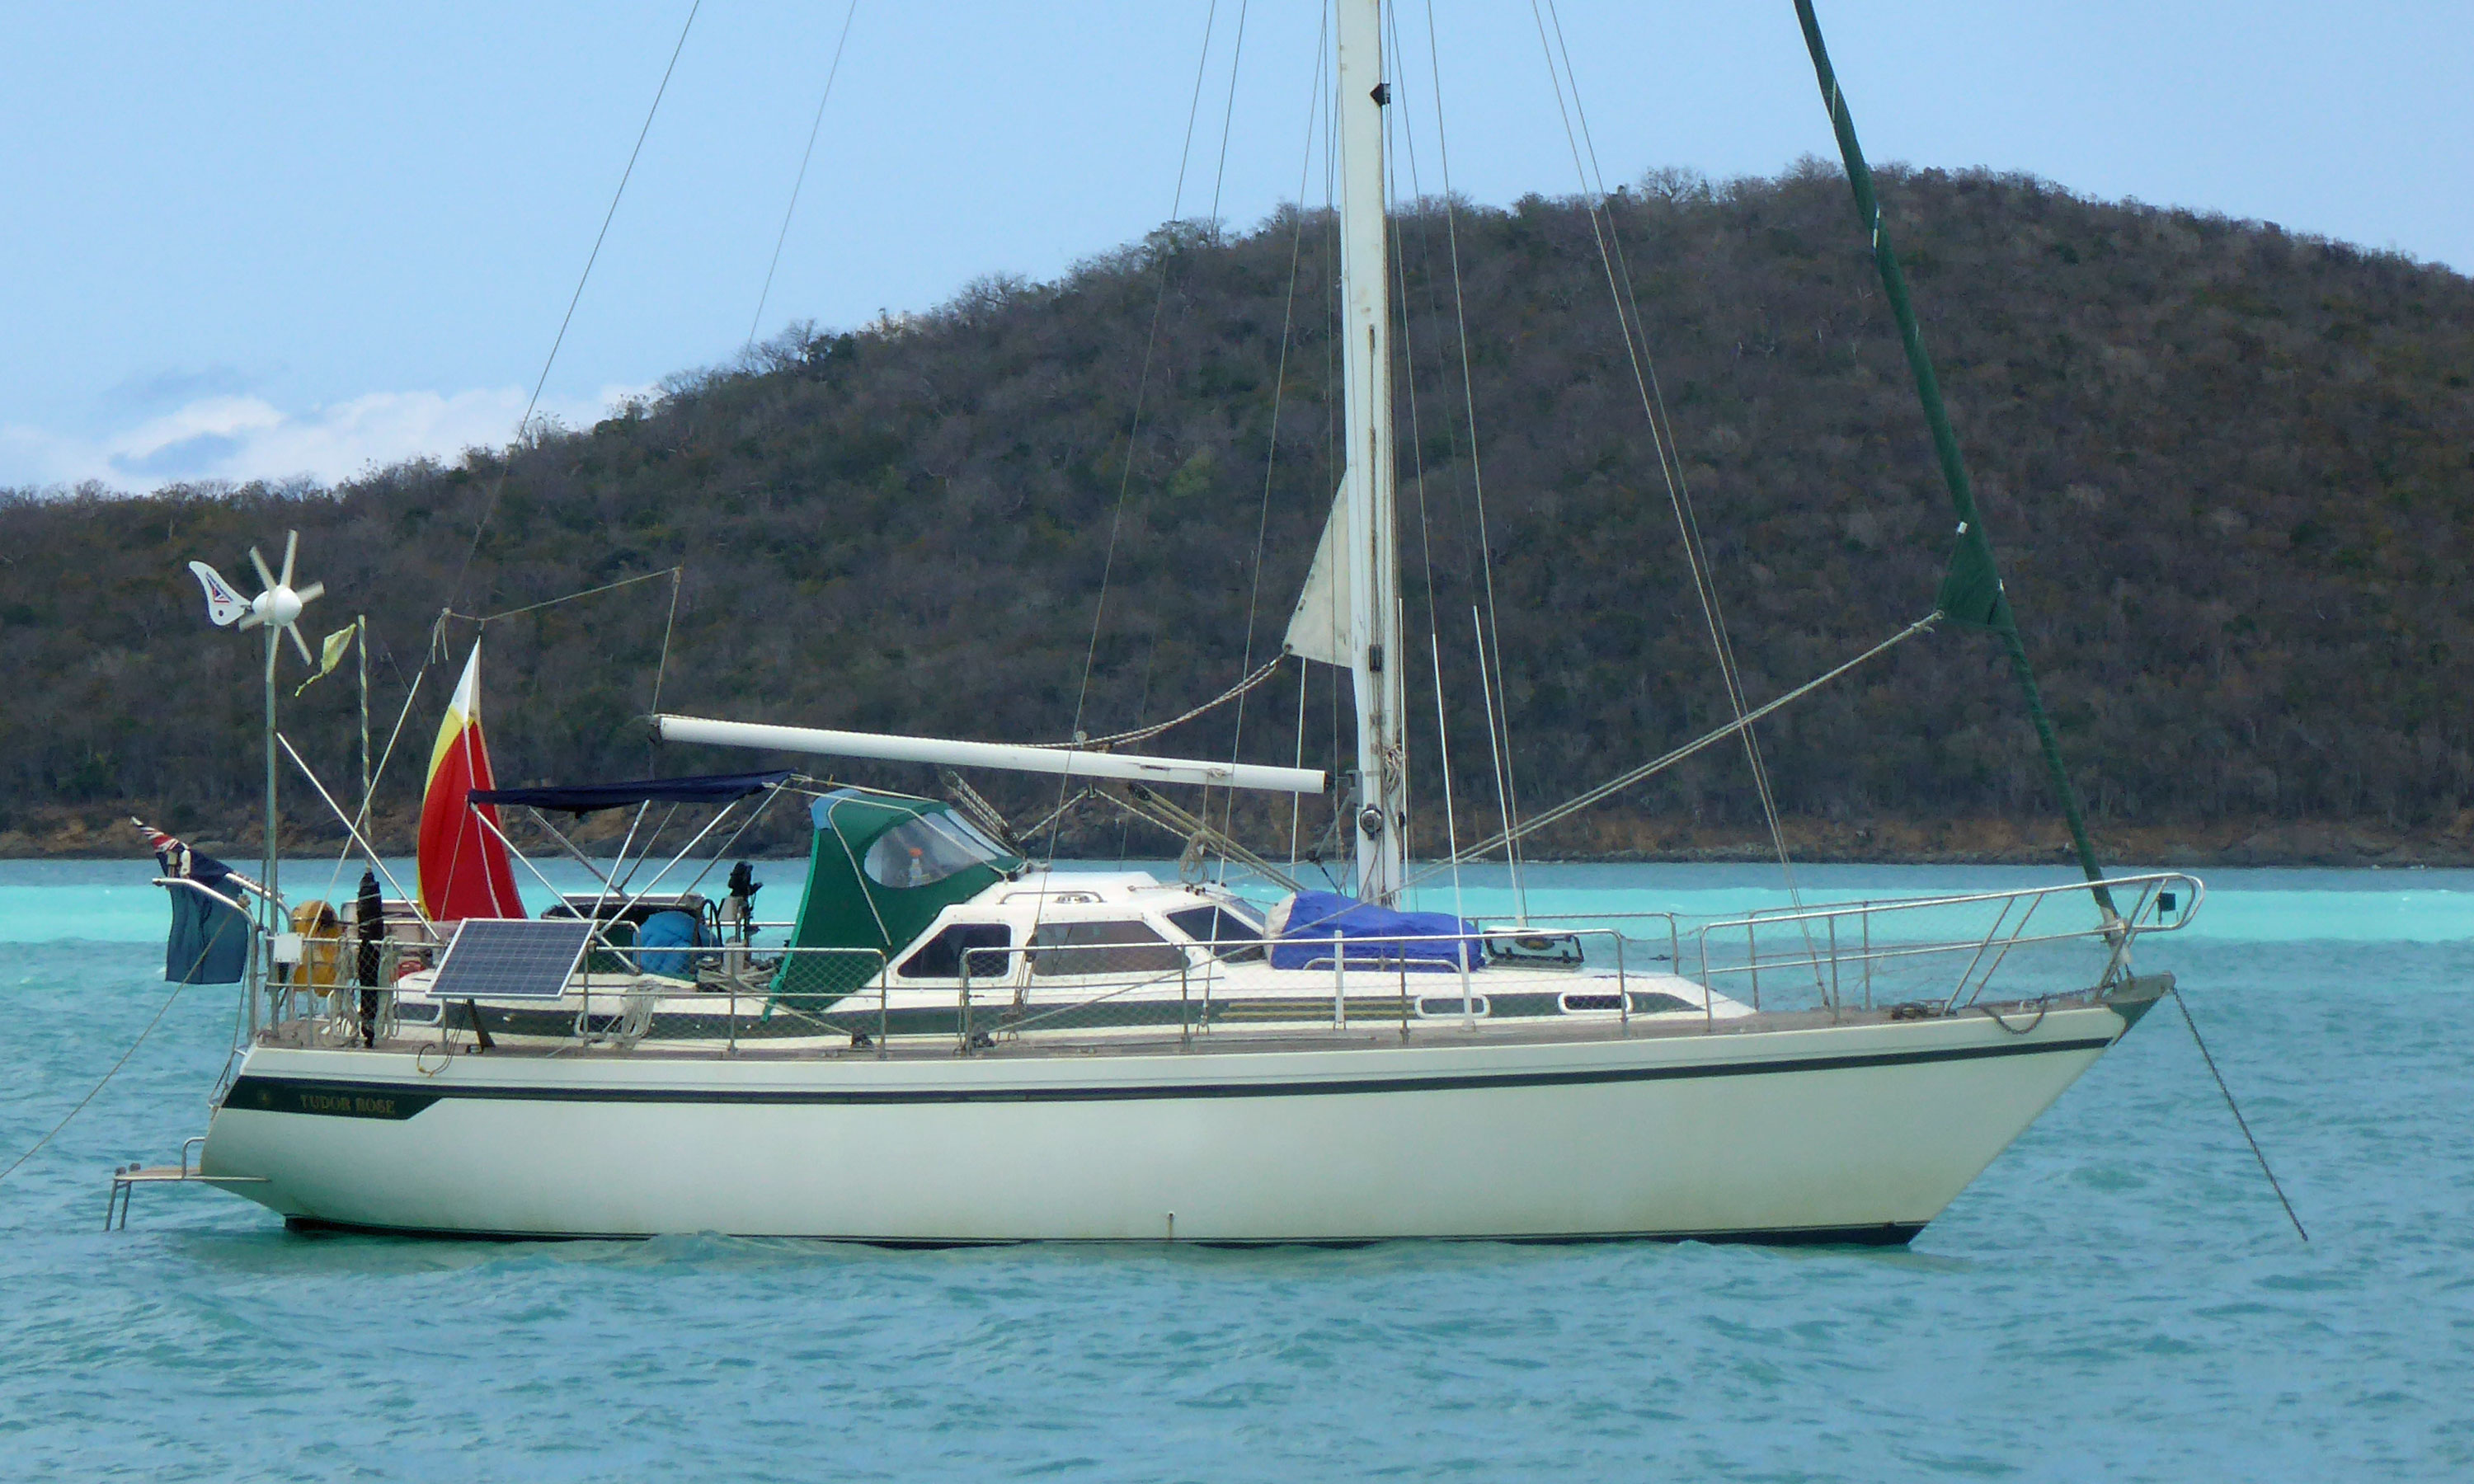 Island Packet Sailboats For Sale Together With Hinckley Sailboat ...